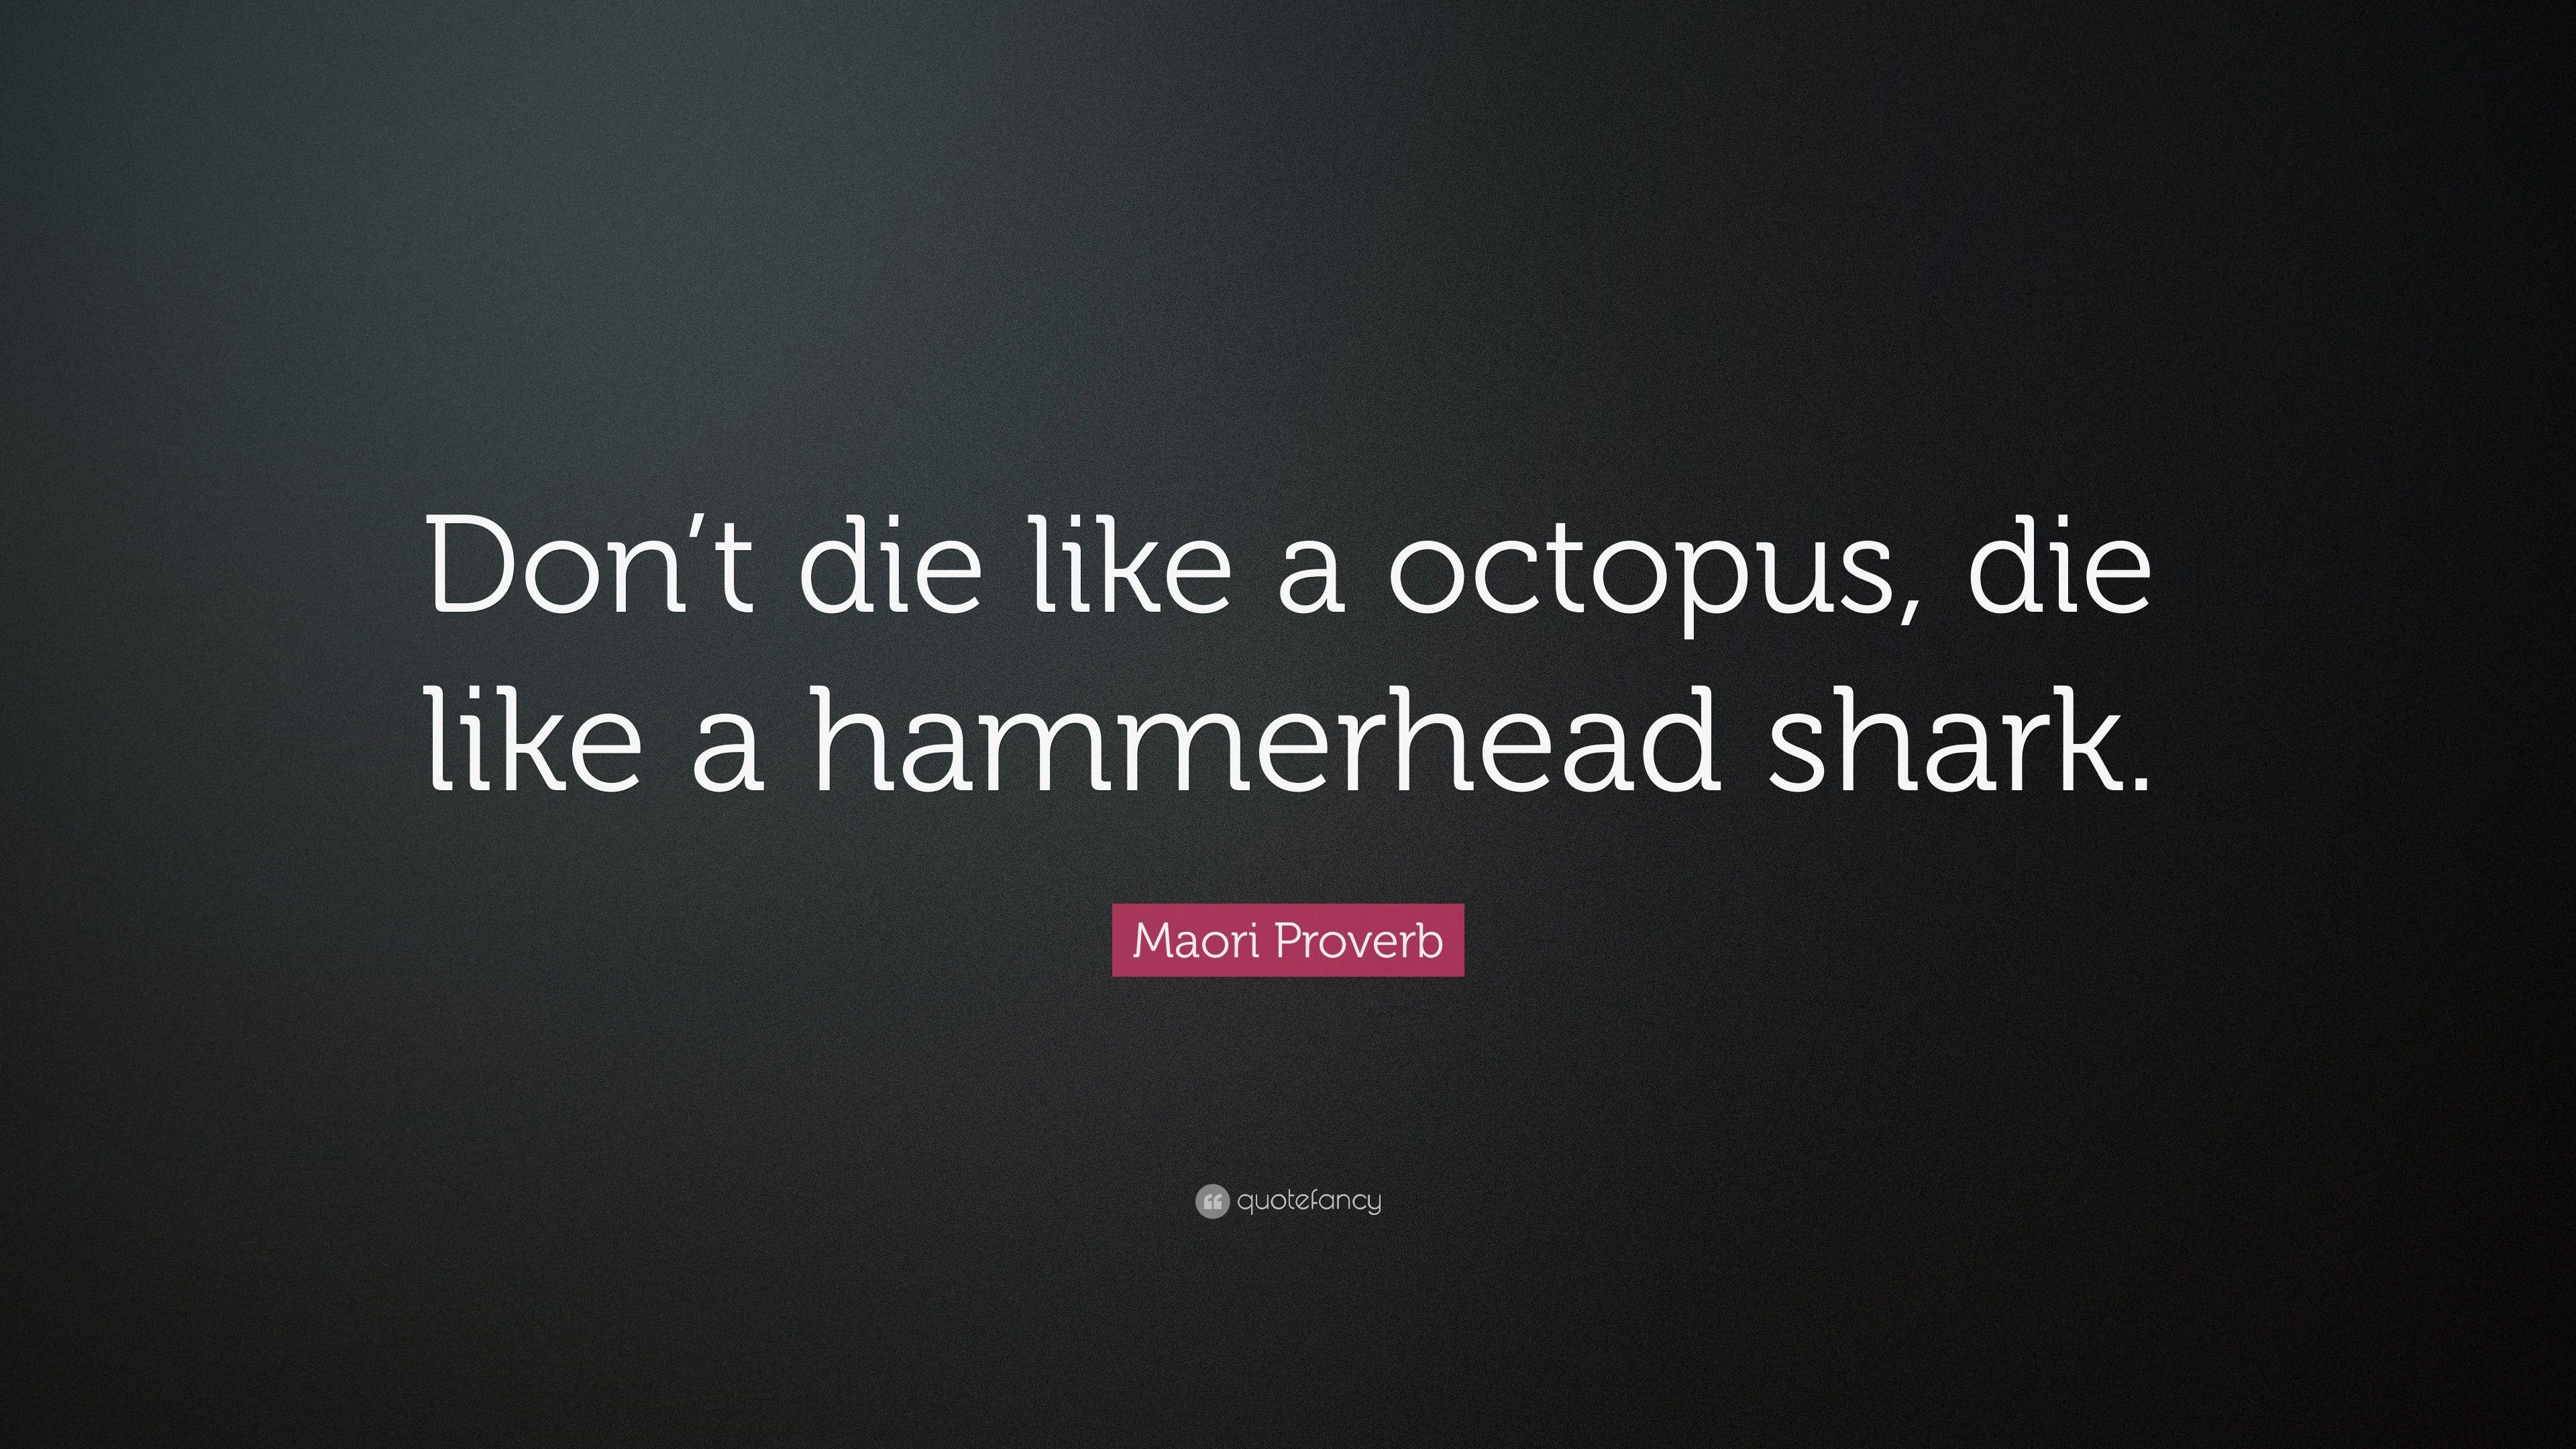 Maori Proverb Quote: “Don't die like a octopus, die like a